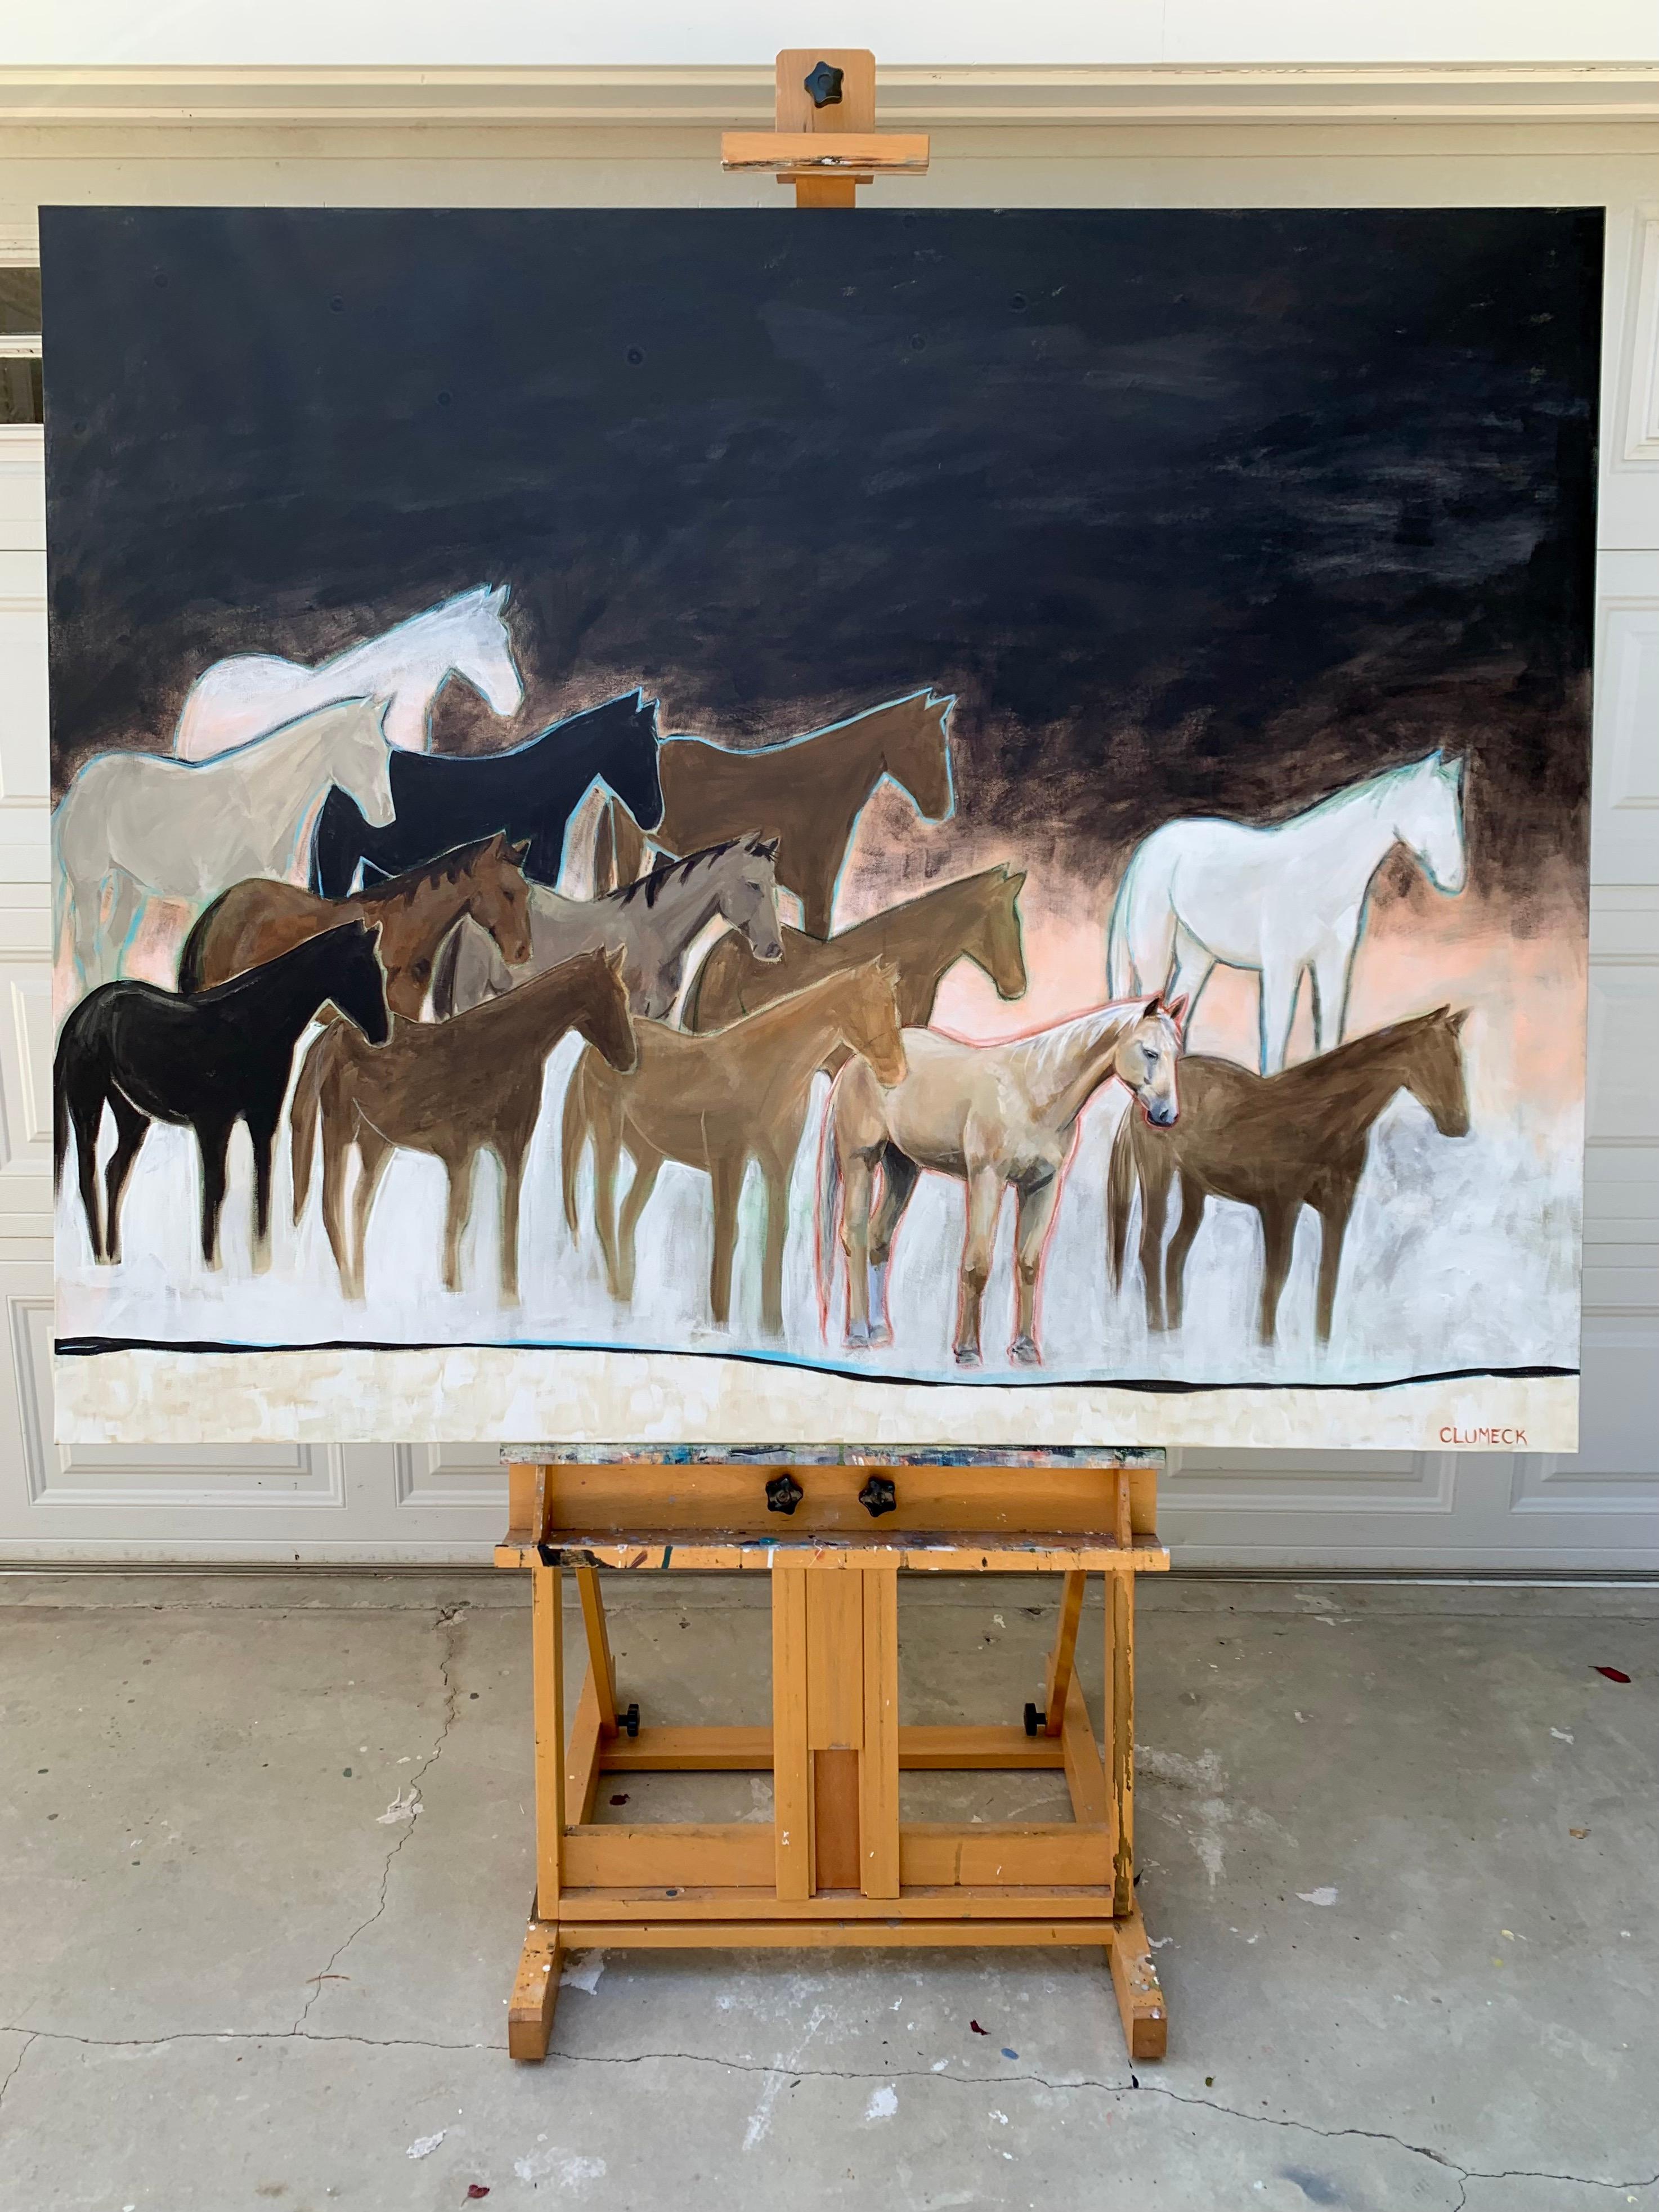 <p>Artist Comments<br>Artist Alana Clumeck illustrates a diverse herd of horses in the wild west. 